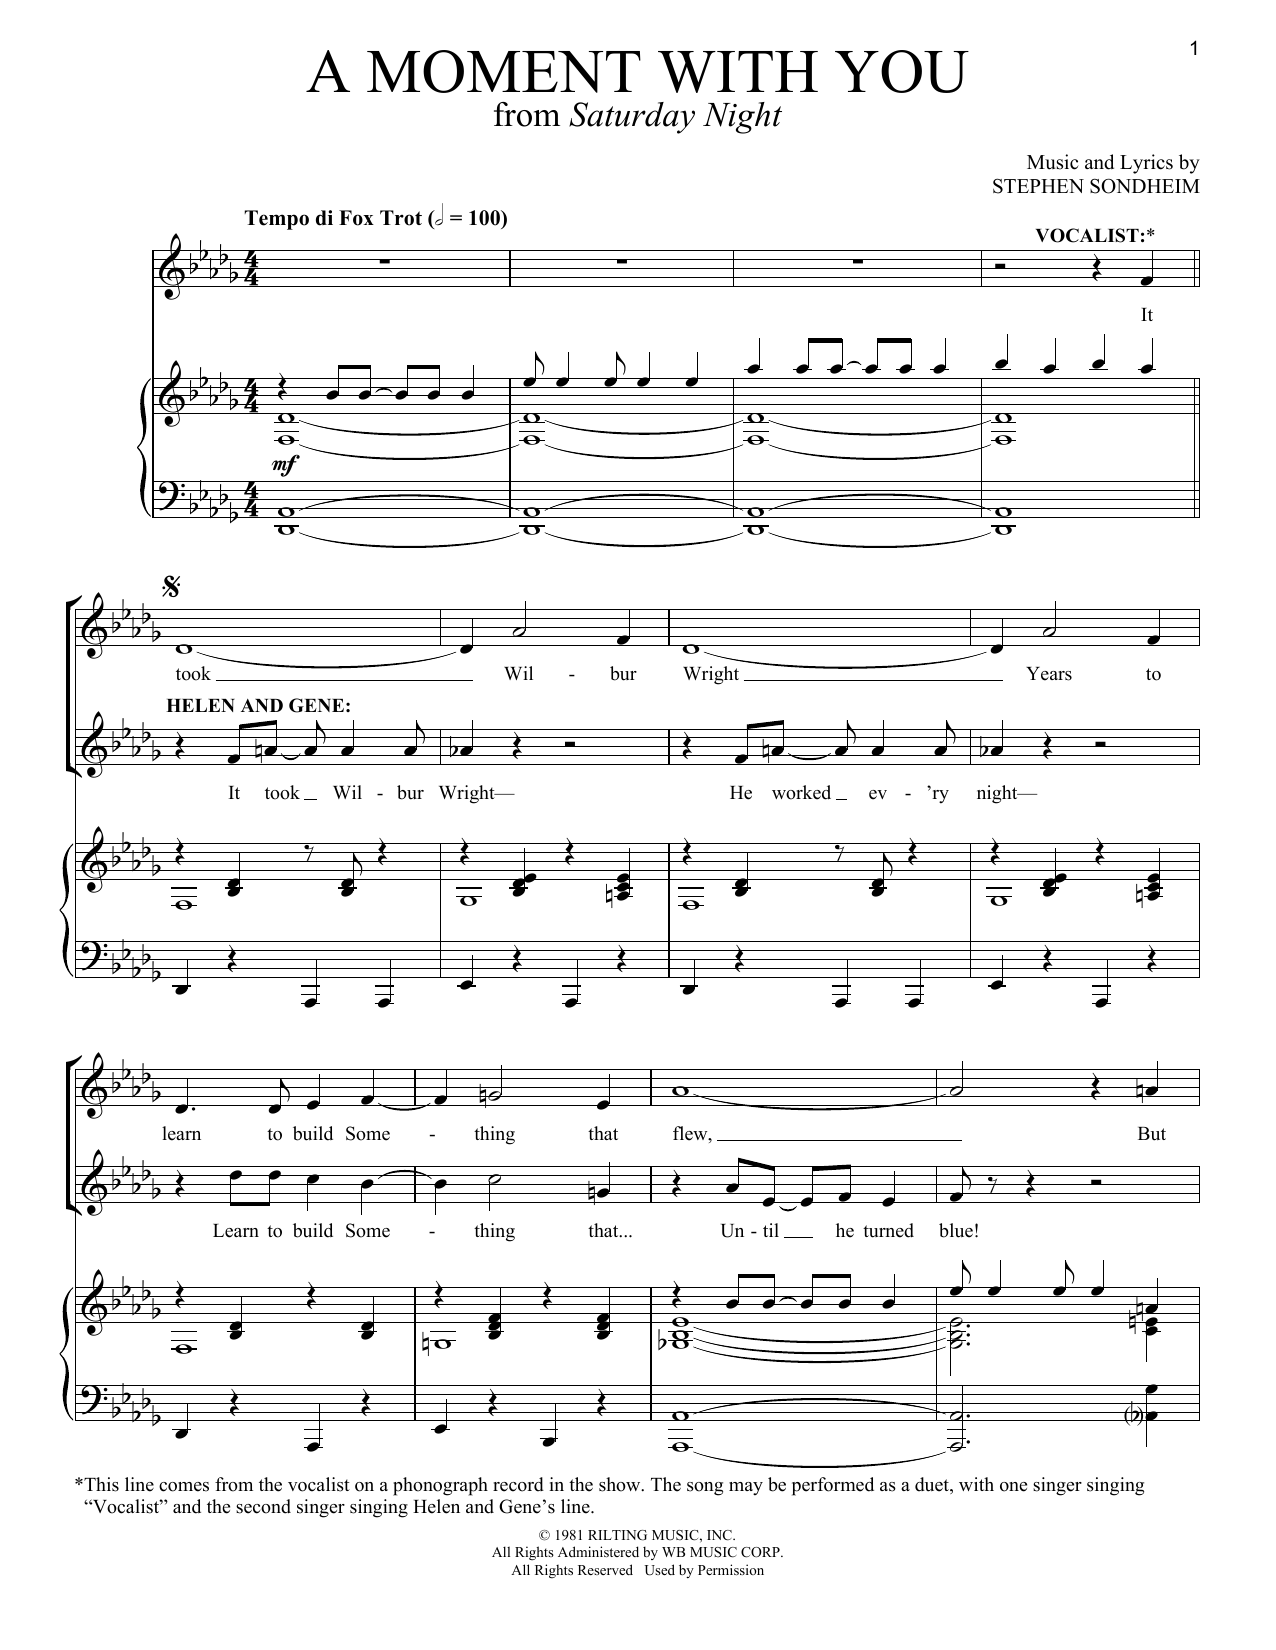 Download Stephen Sondheim A Moment With You Sheet Music